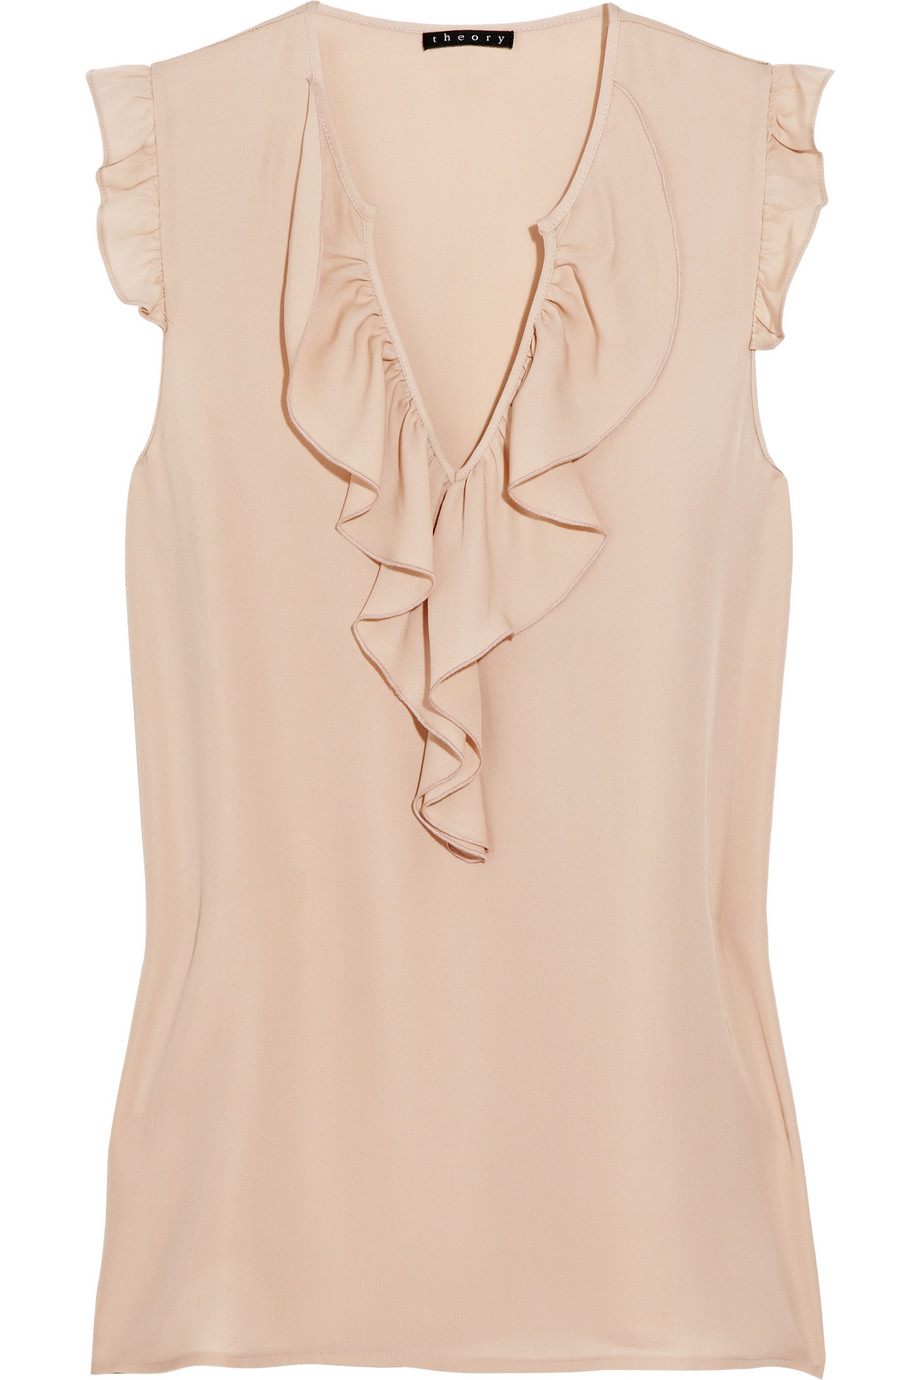 Theory Nalena Ruffled Silk-crepe Blouse in Blush (Pink) - Lyst